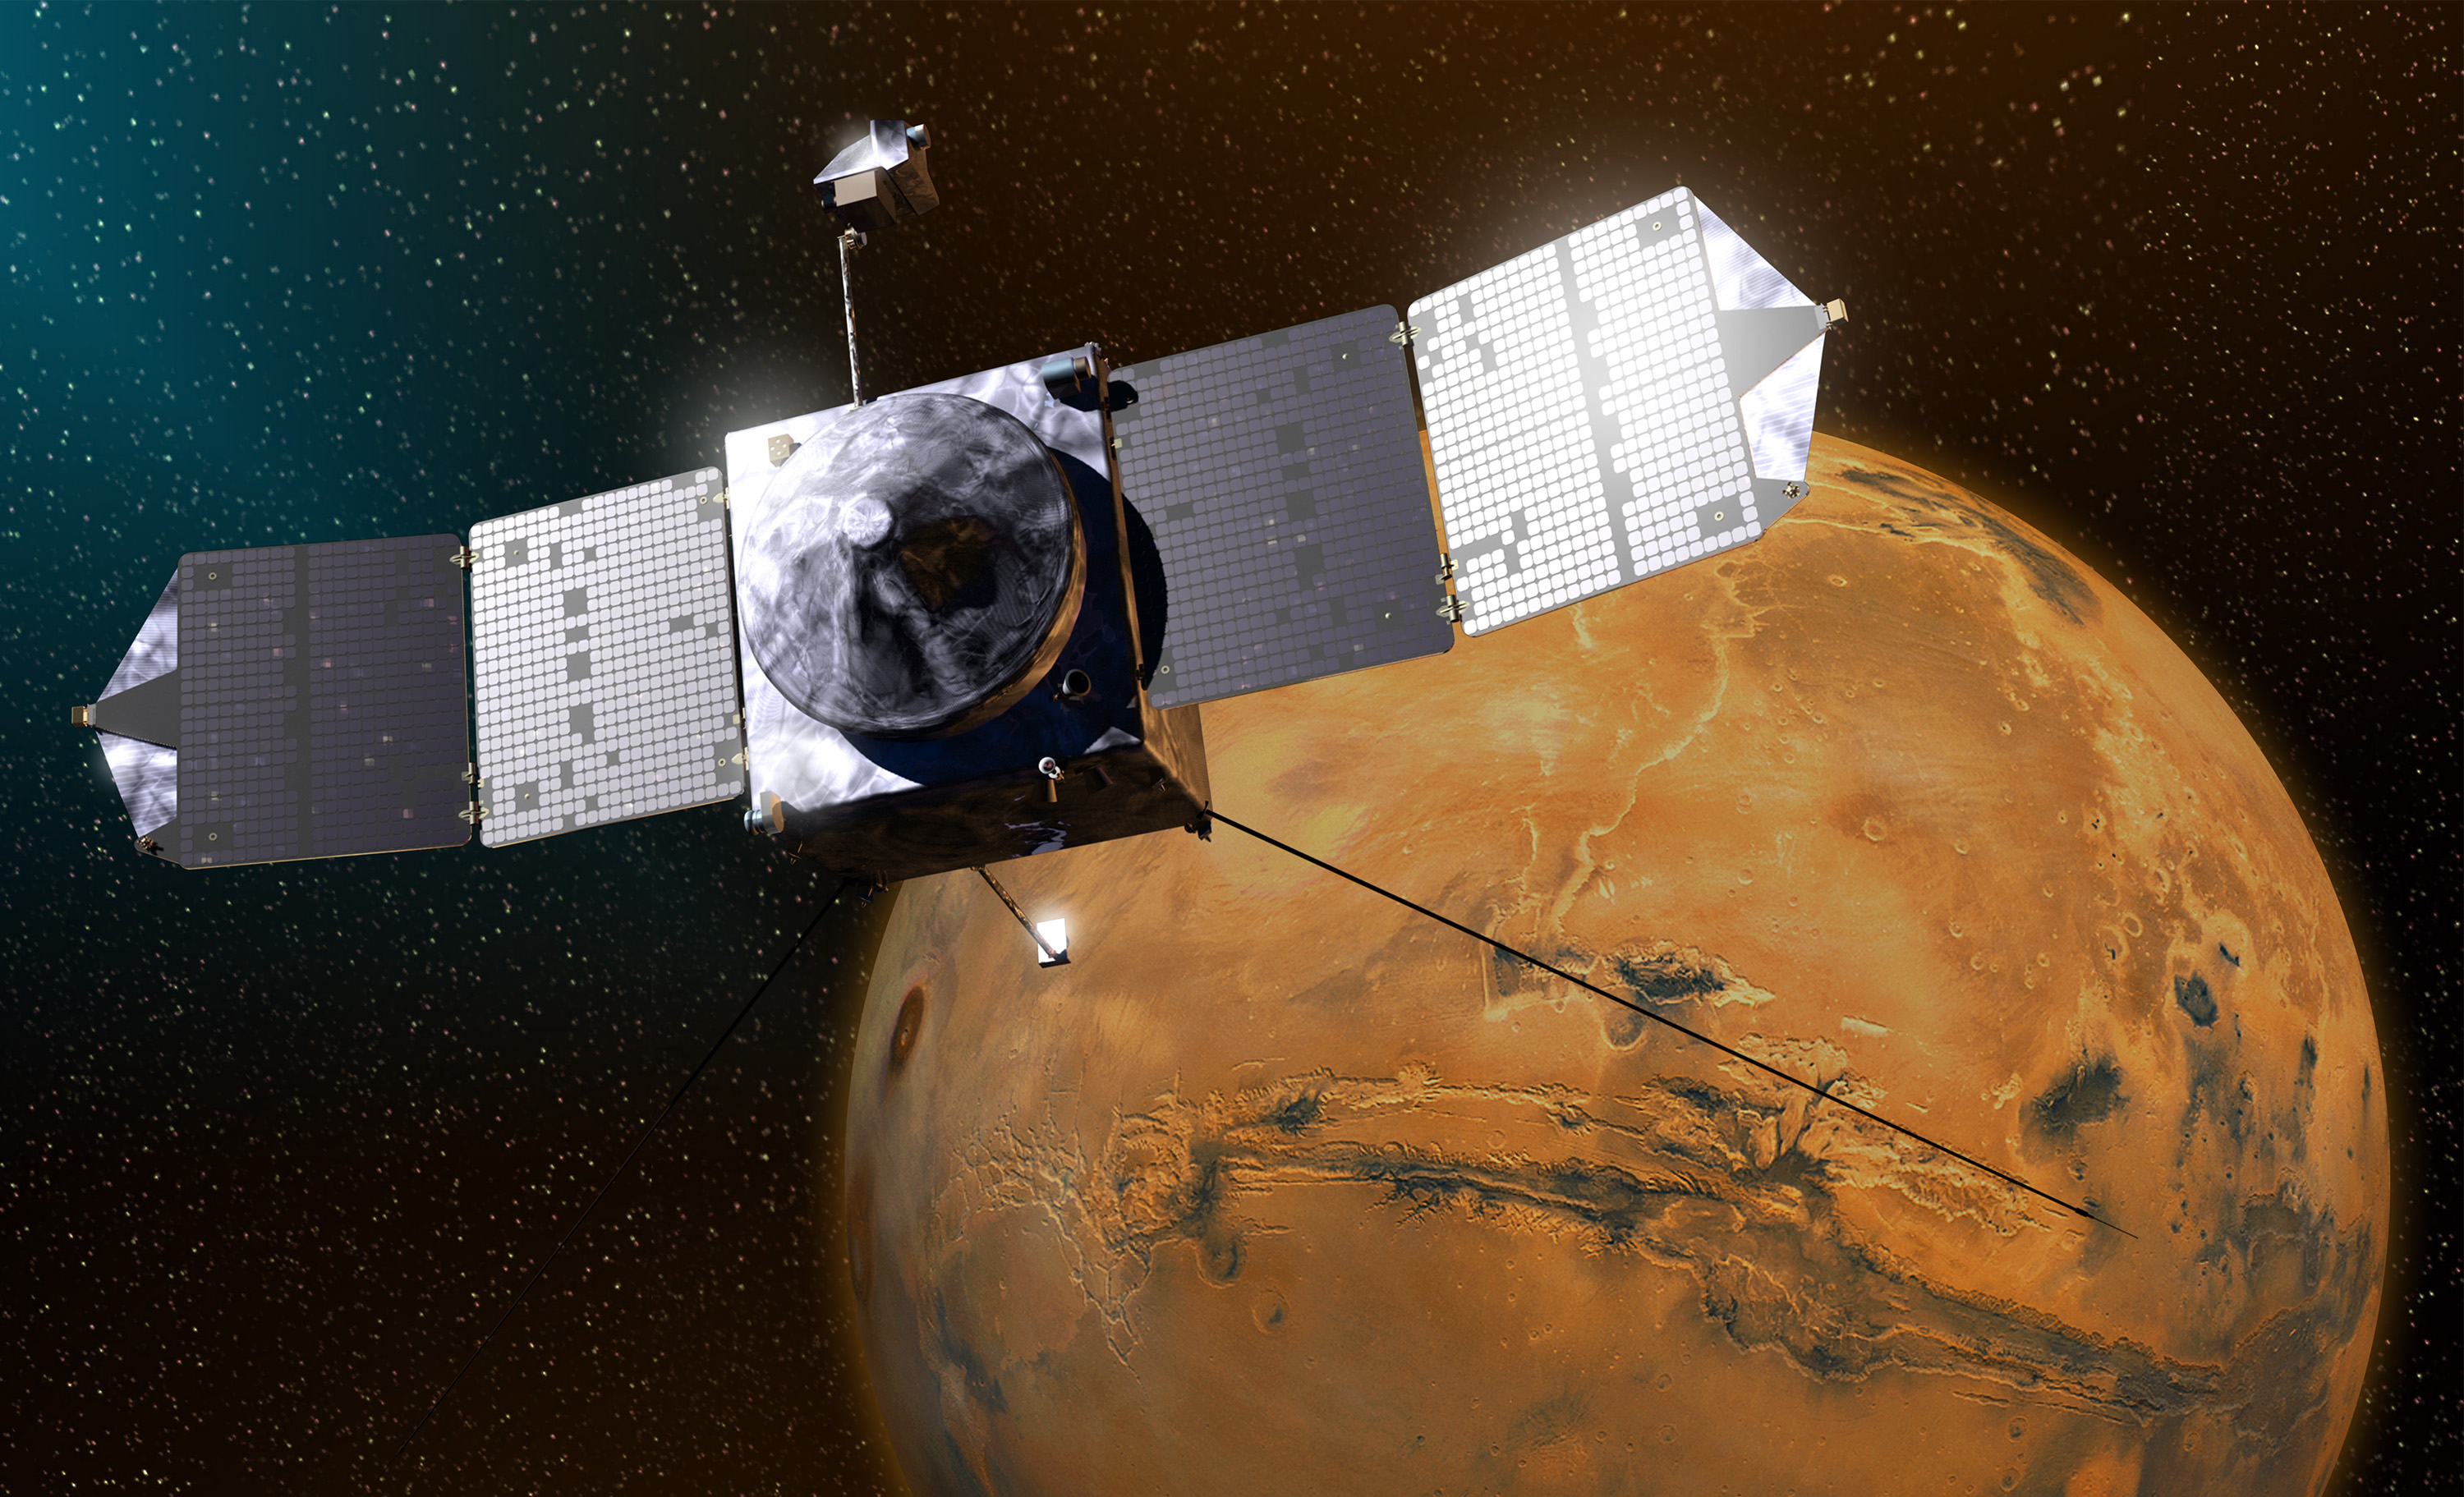 Artist’s concept of the MAVEN spacecraft in orbit around Mars. The mission recently completed one year of successful science operations around the Red planet and is already primed for a year-long extended mission until at least September 2016. Image Credit: NASA/GSFC